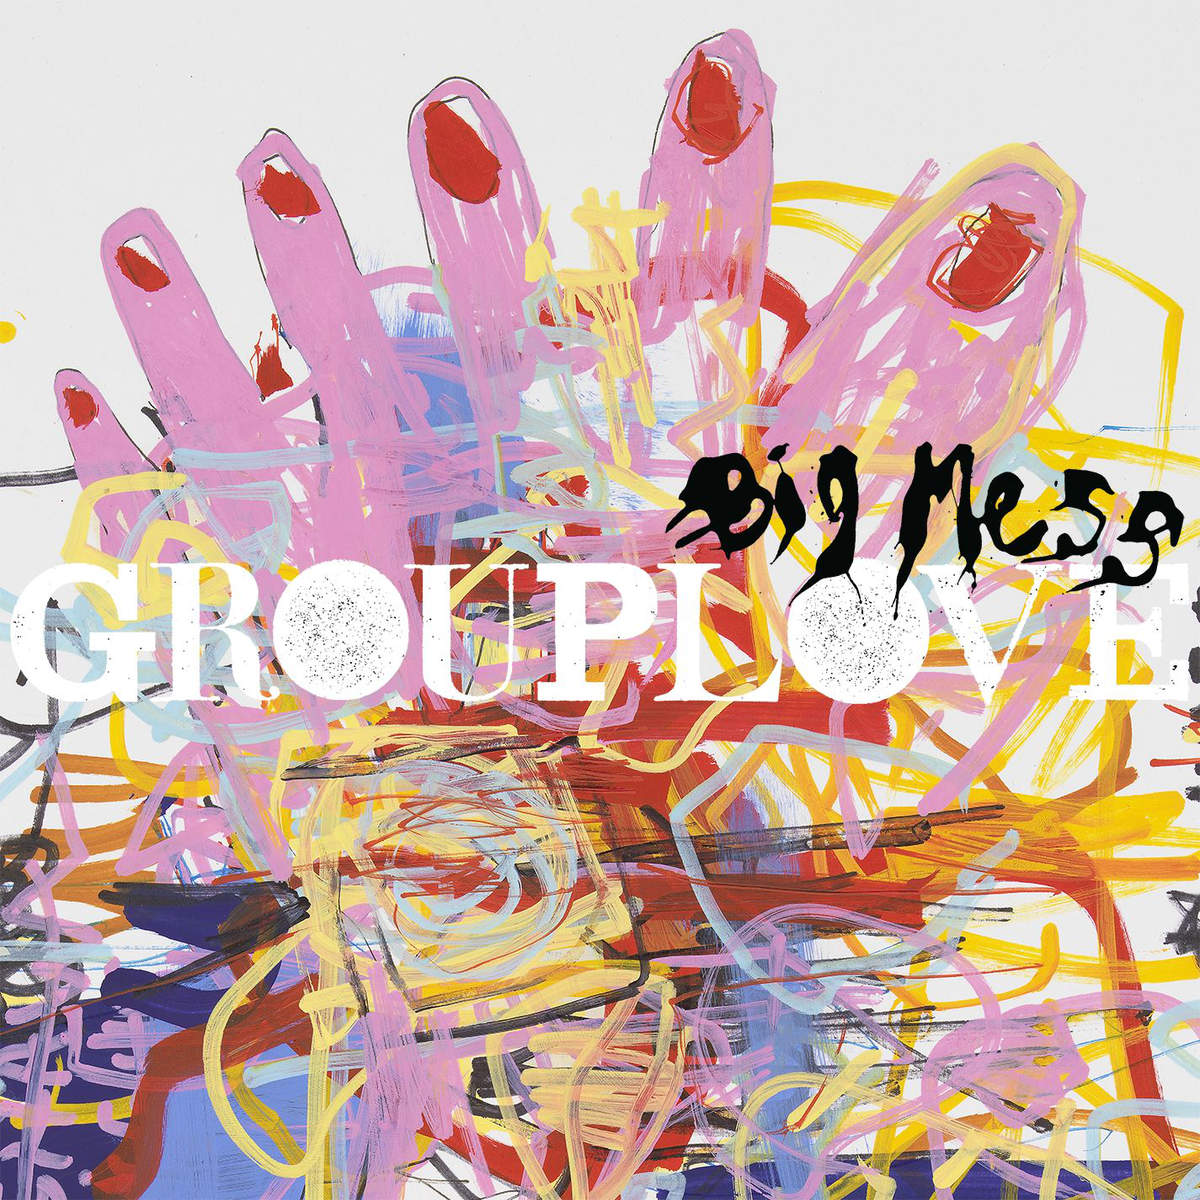 'Big Mess' by Grouplove, album review by Daniel Geddes